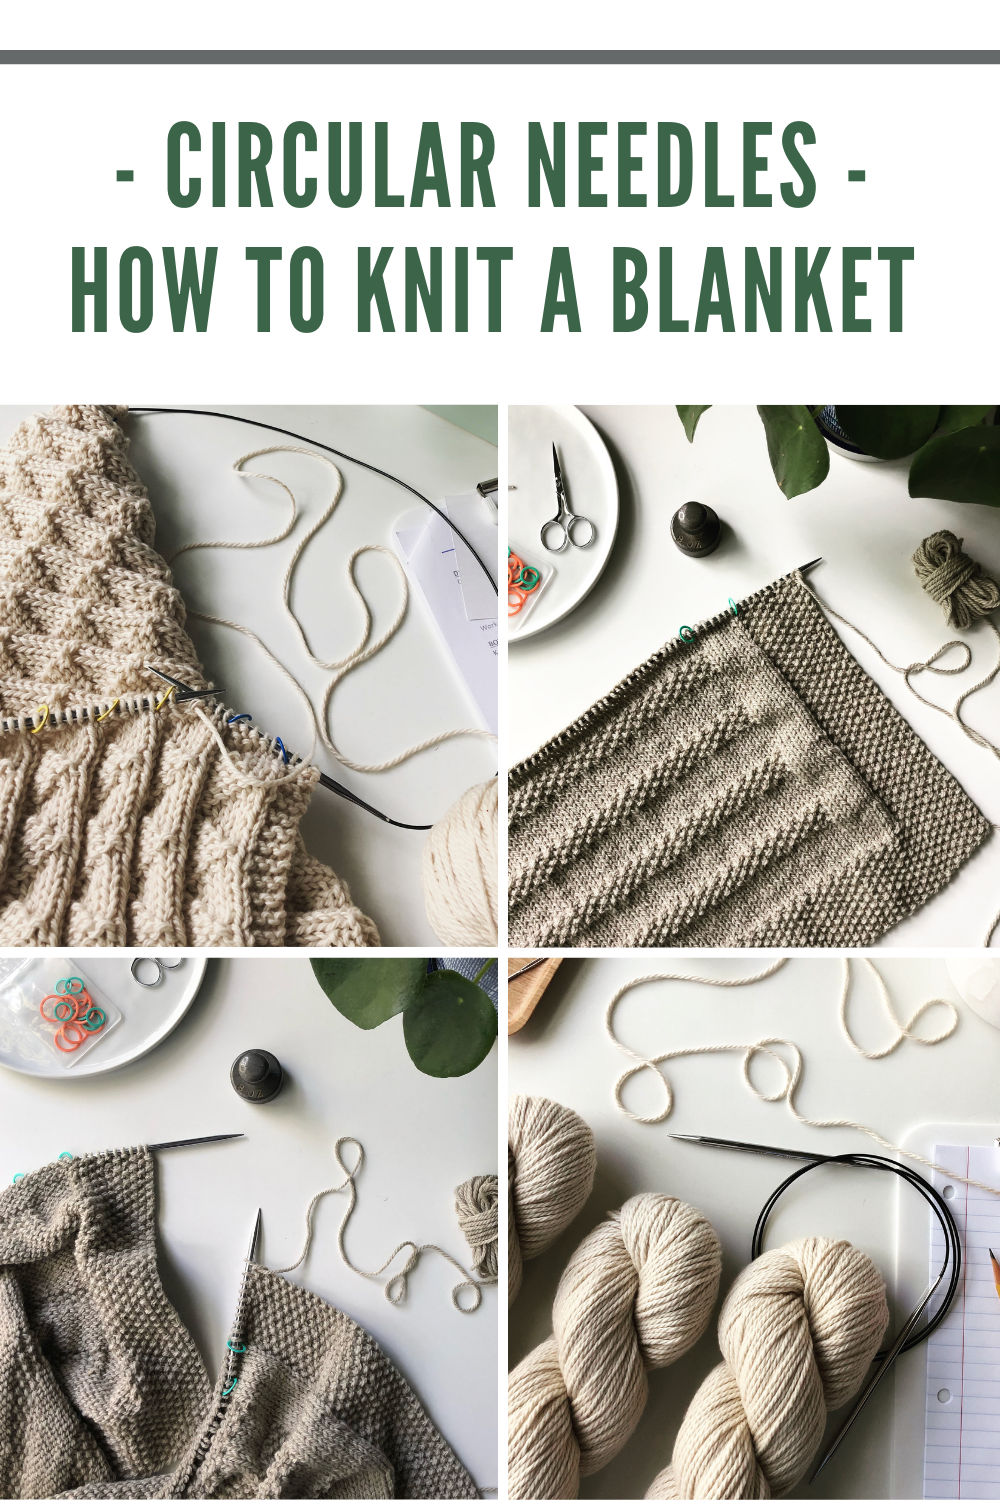 How to Knit a Blanket With Circular Knitting Needles 